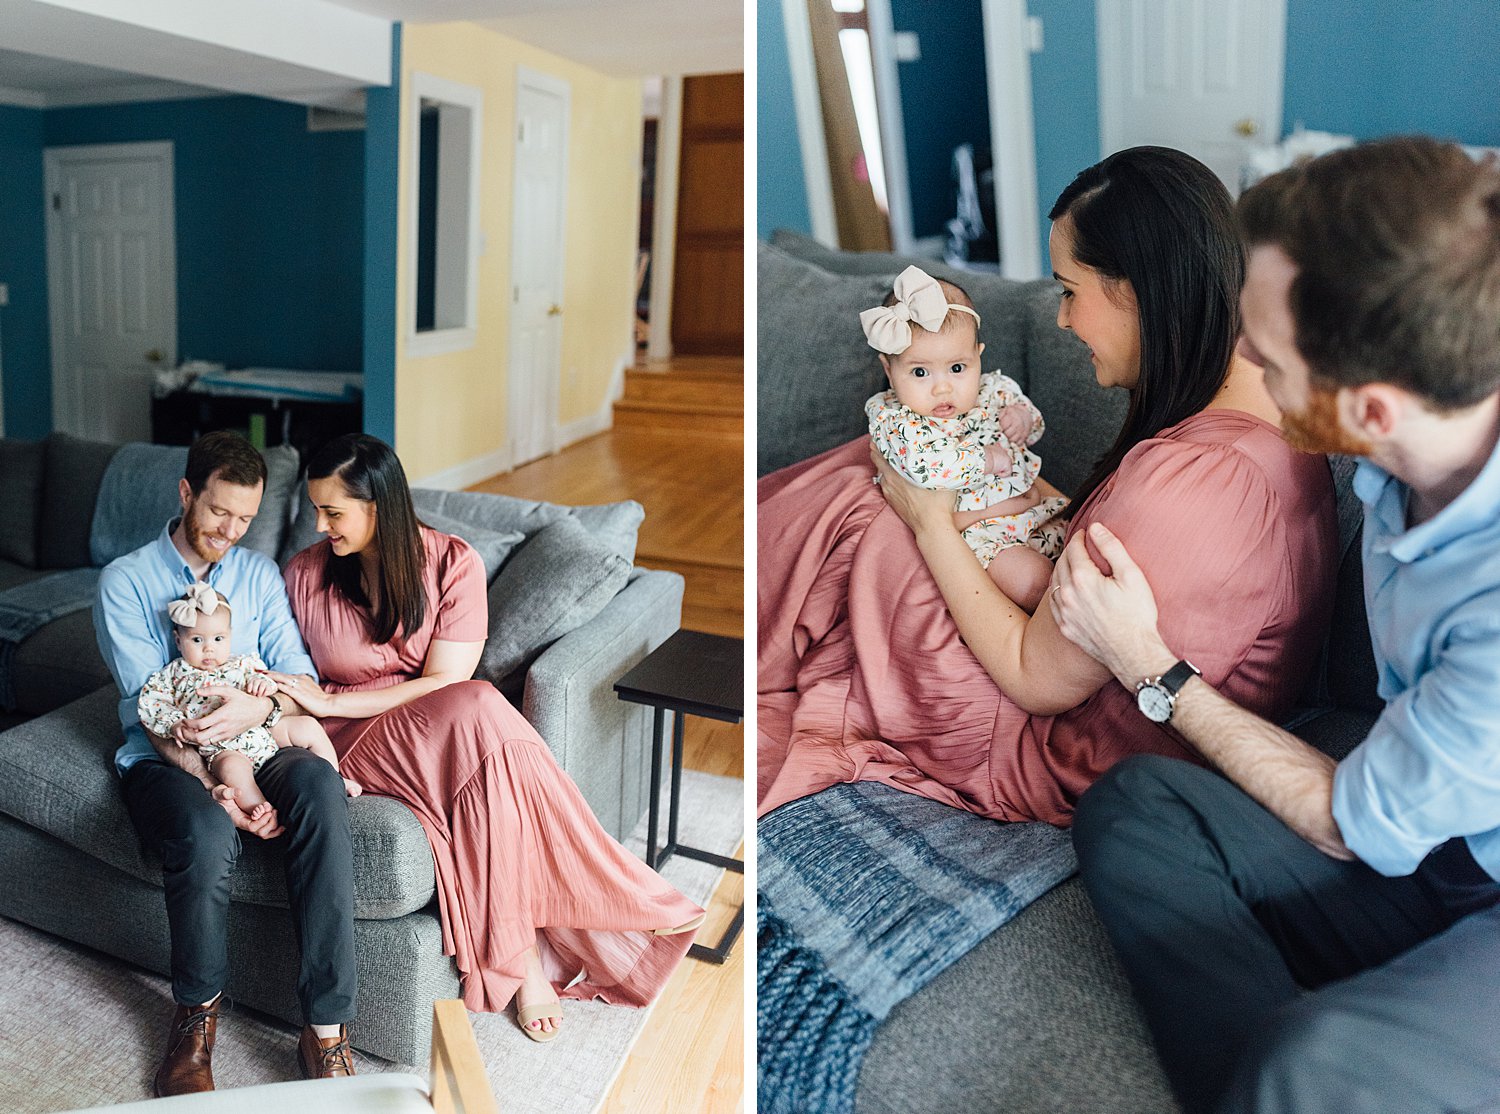 The Hempelmanns - Potomac In-Home Newborn Session - Montgomery County Maryland family photographer - Alison Dunn Photography photo